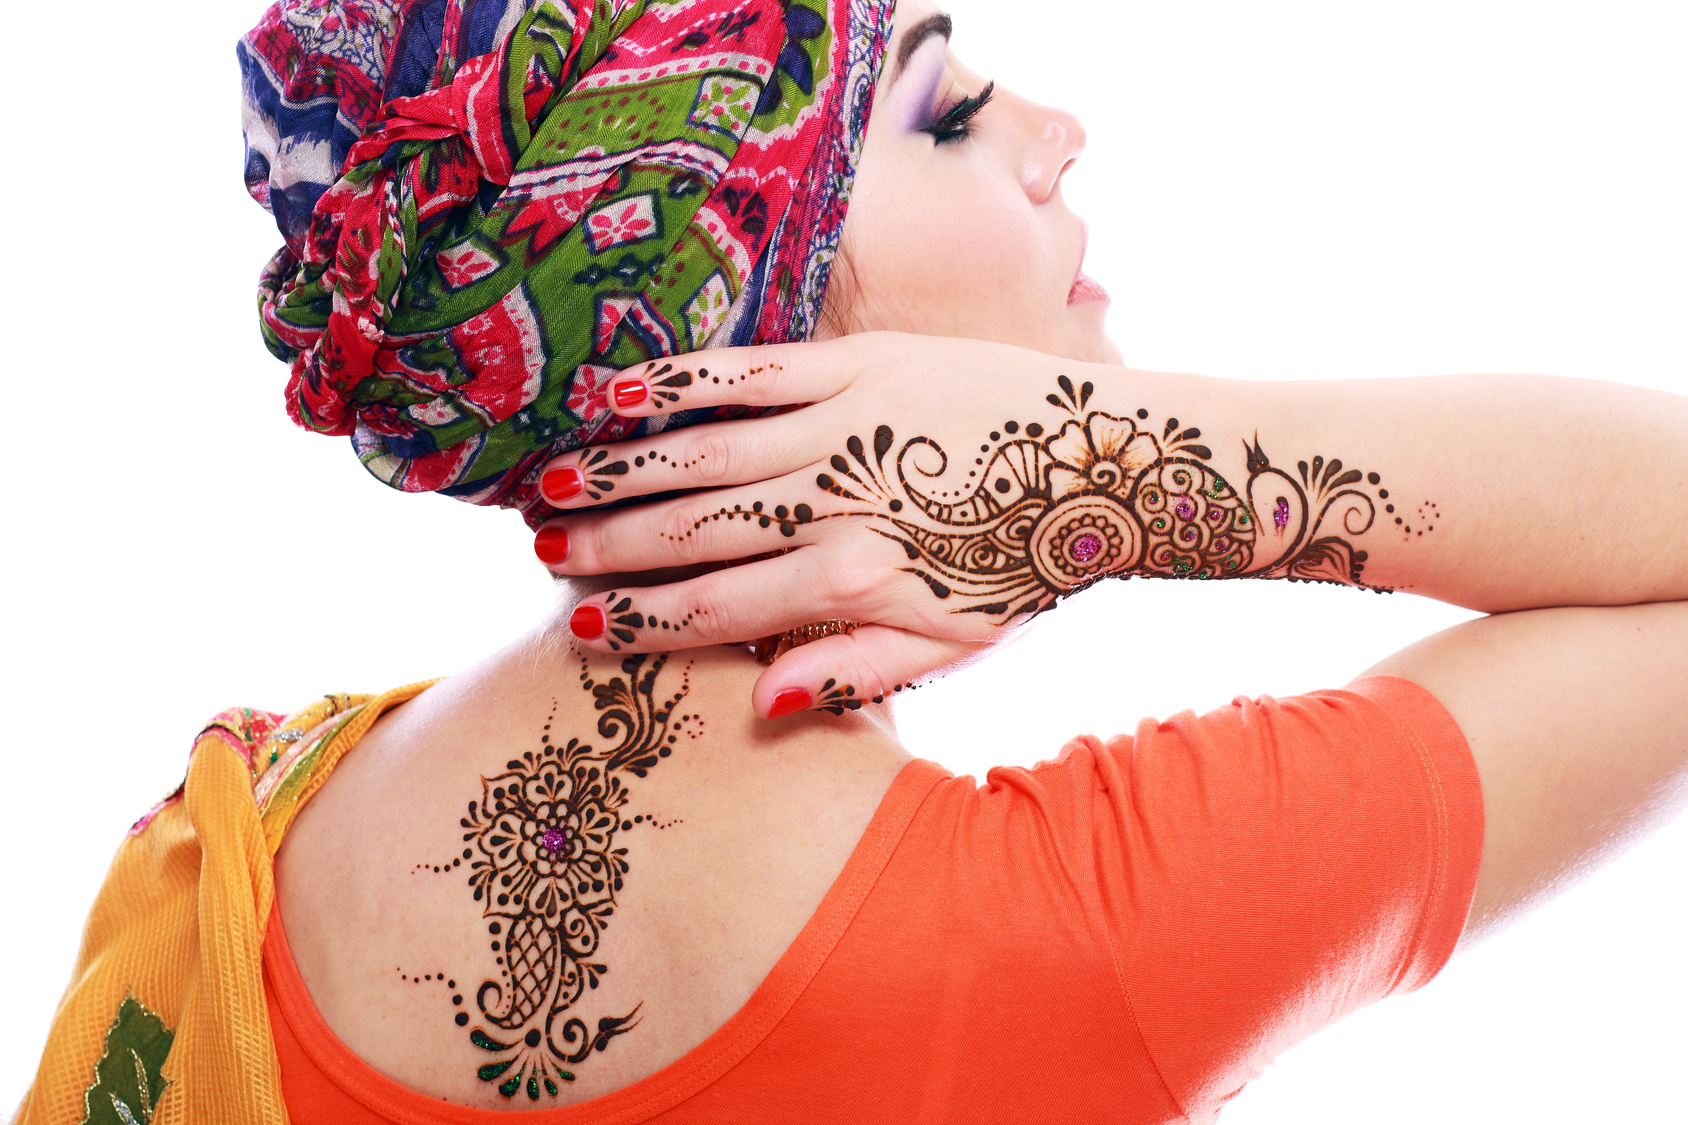 Beautiful woman arabian make up and turban on head with detail of henna being applied to hand and backt isolated